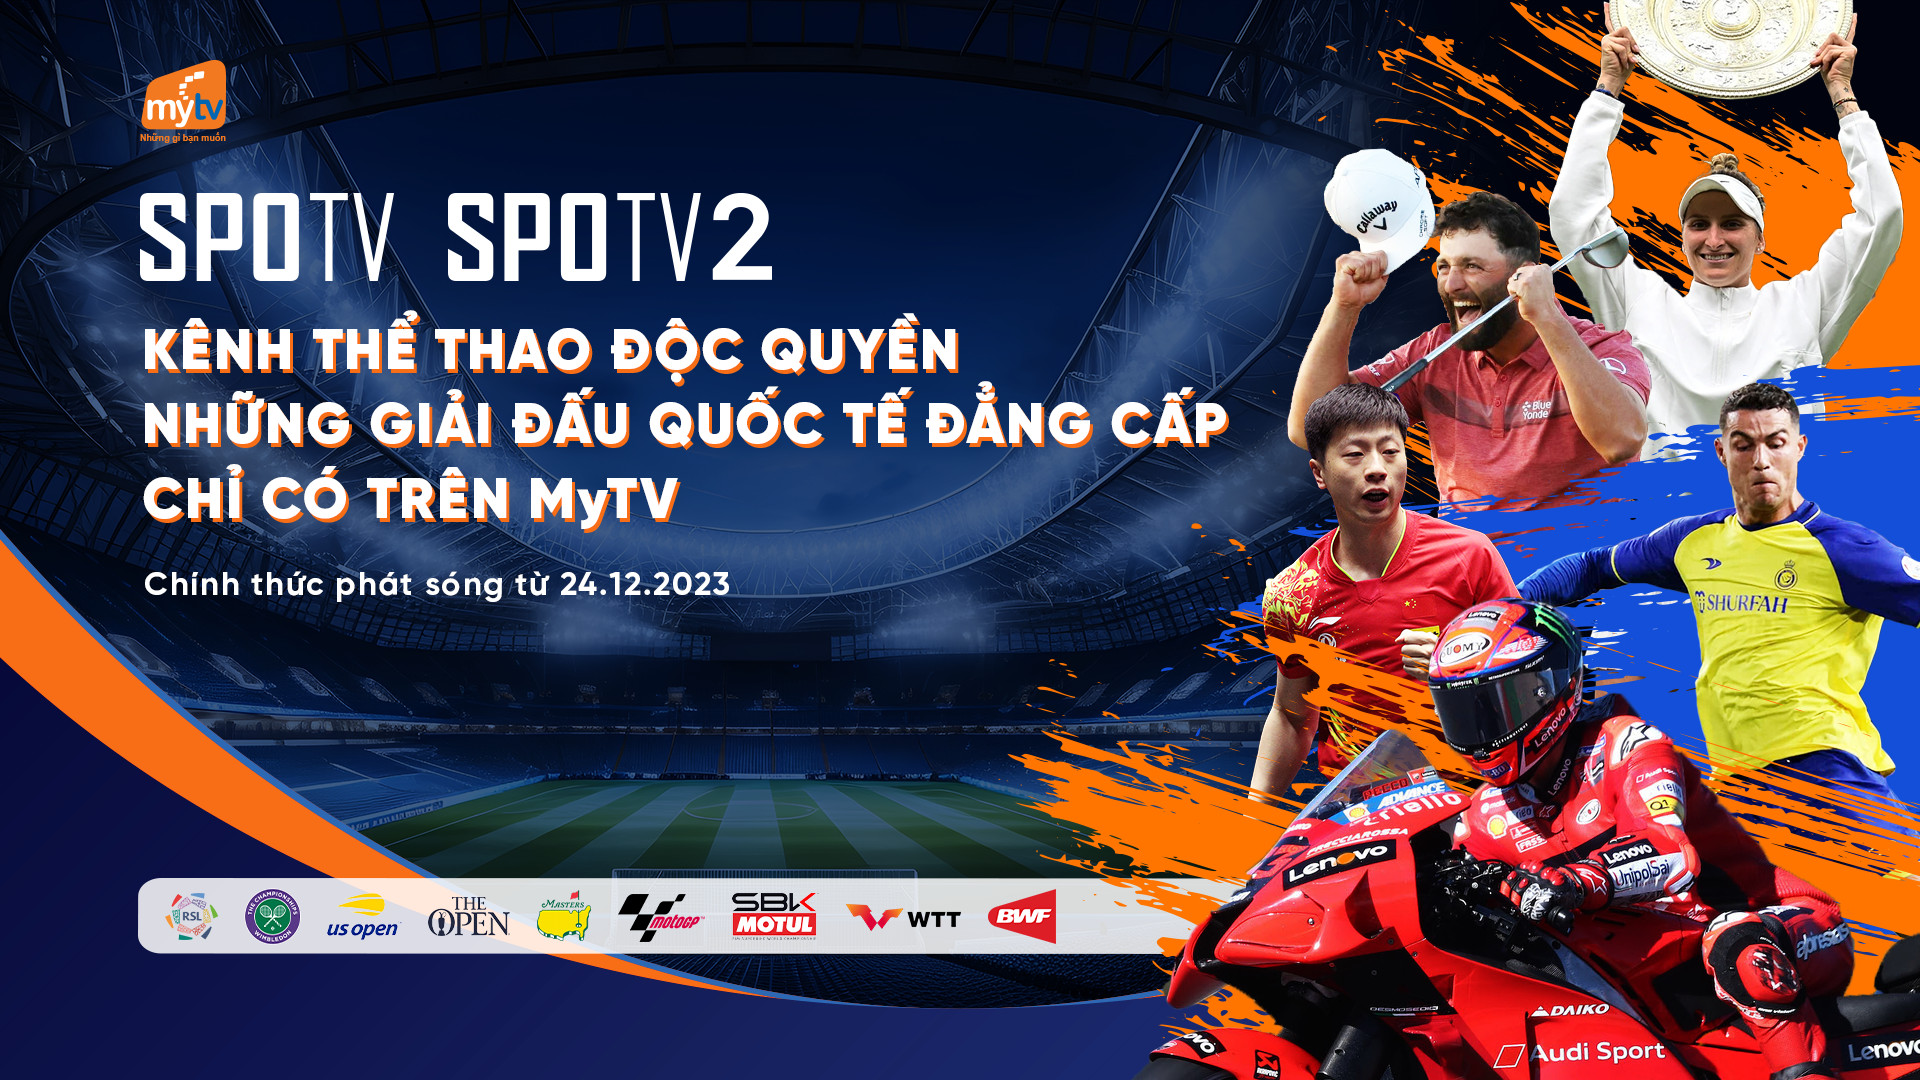 MyTV Television exclusively provides SPOTV sports channels in Vietnam